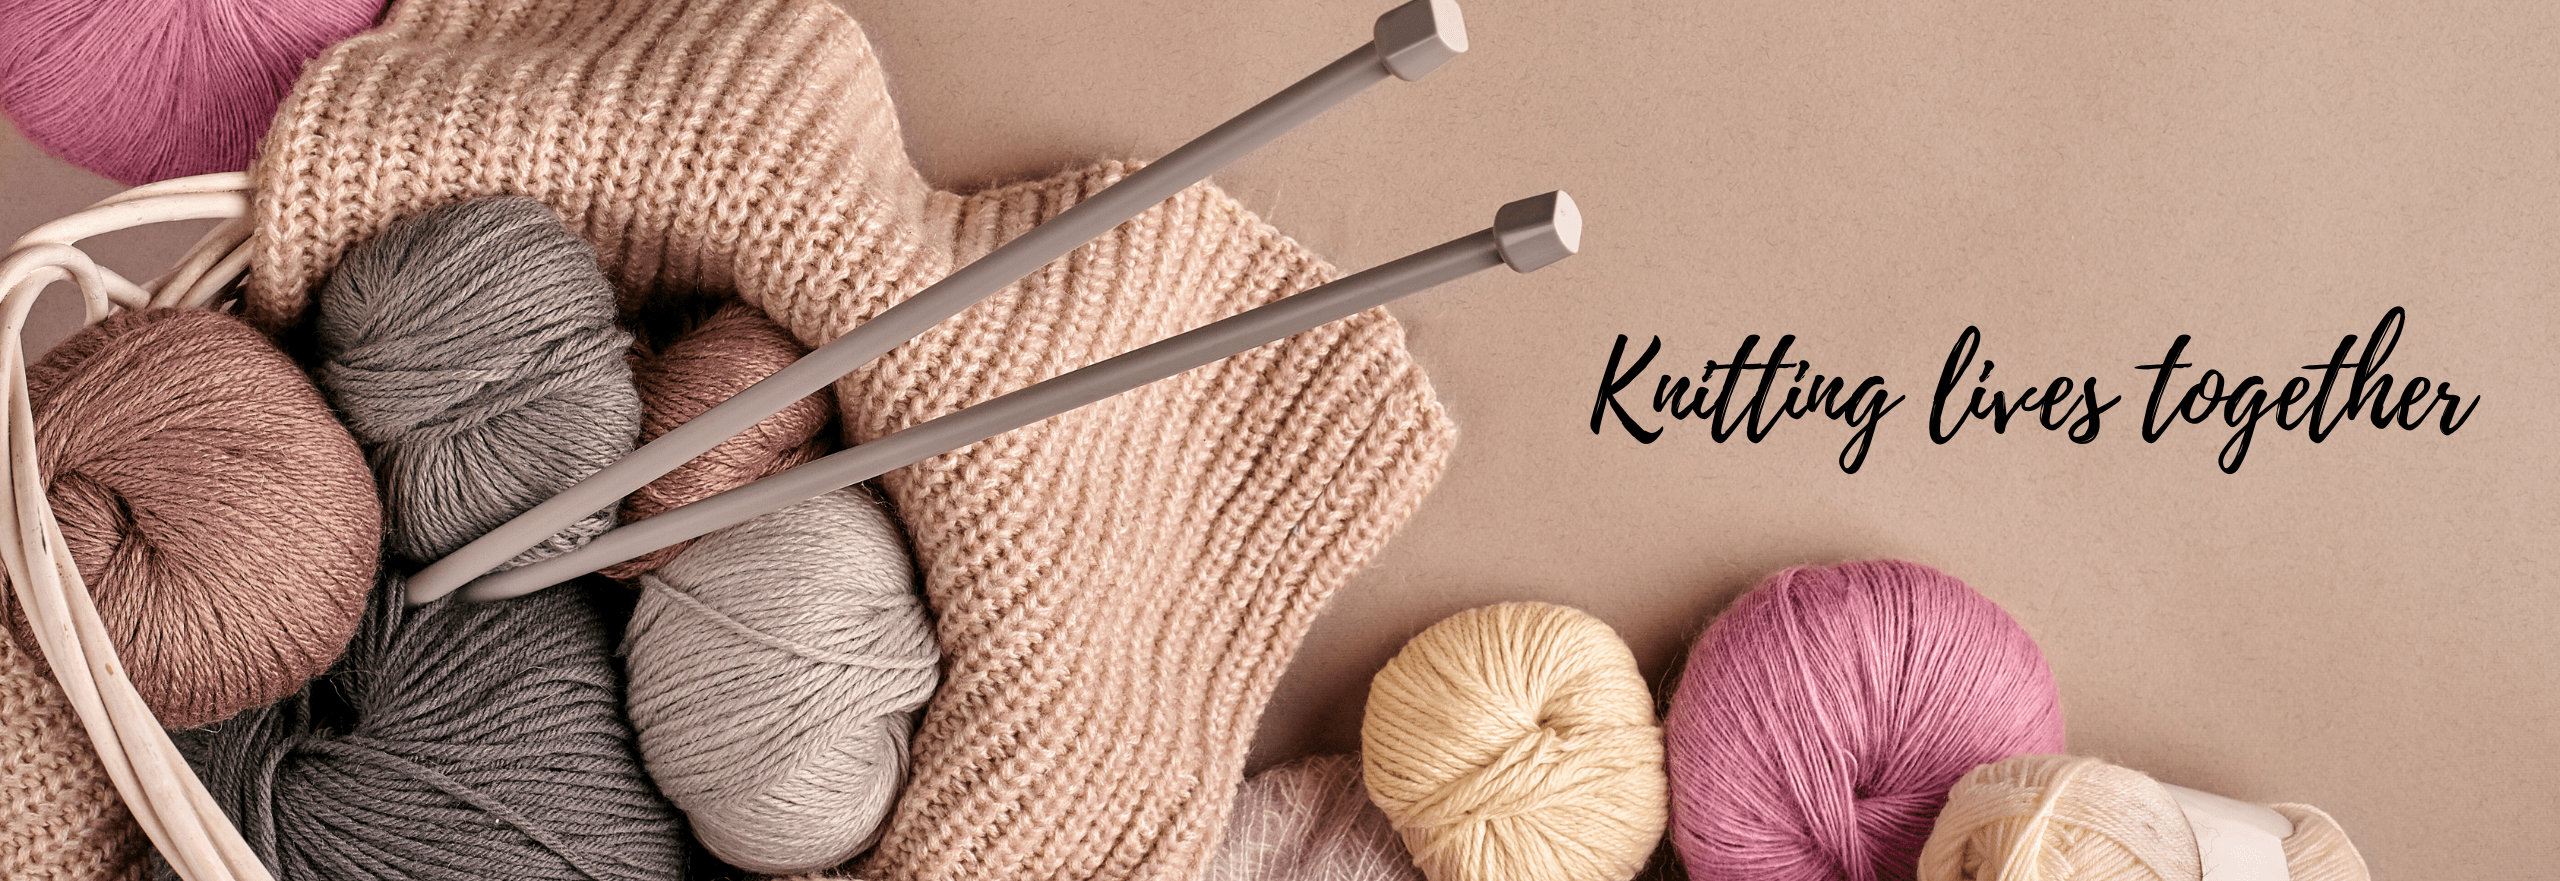 Knitting needles and wool - text reads Knitting Lives Together